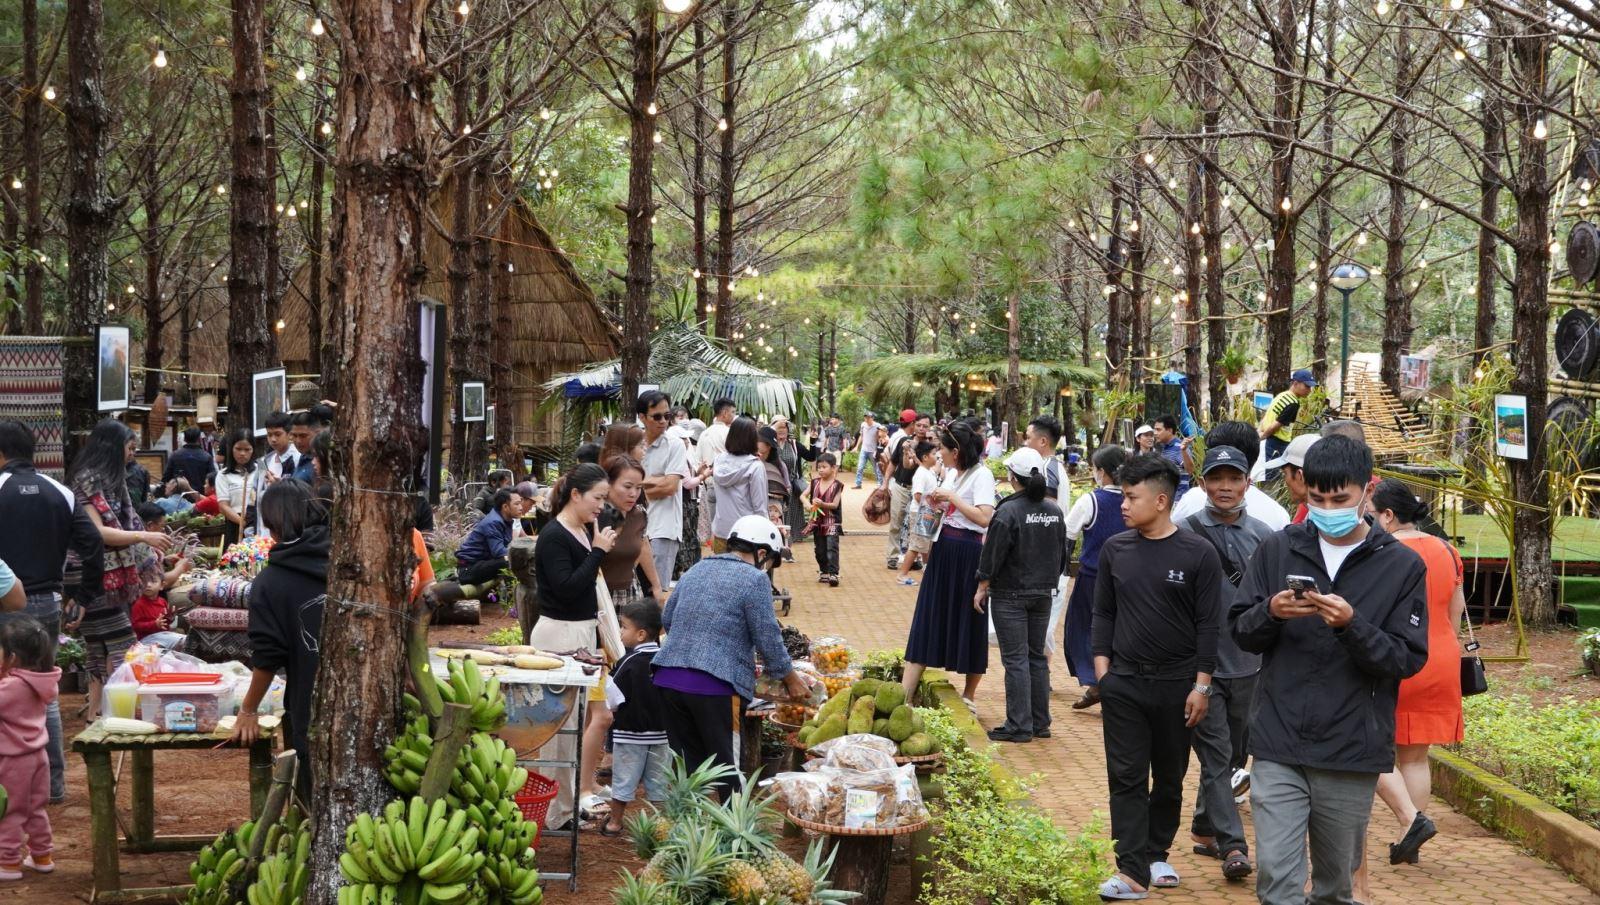 Thousands of tourists visited Măng Đen during the National Day holiday on September 2nd.